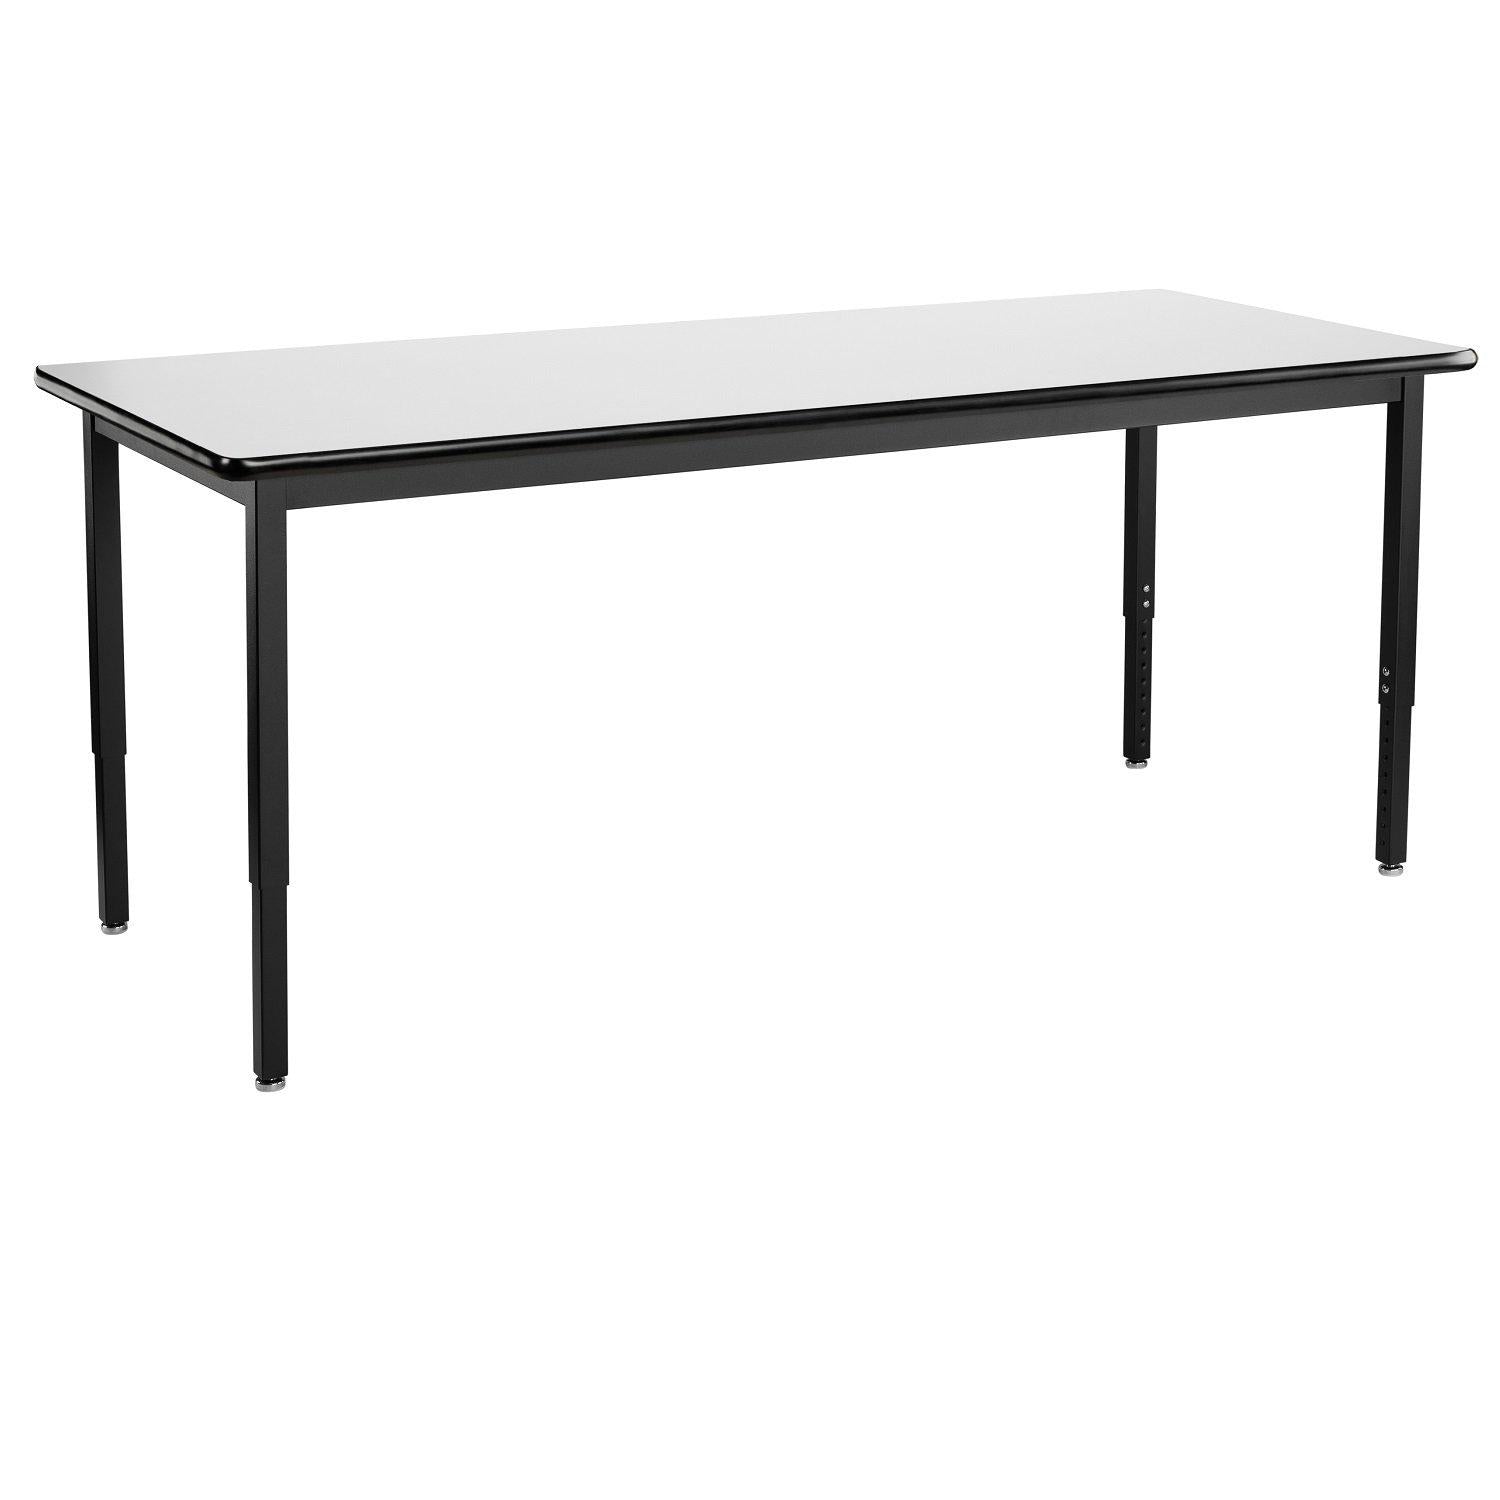 Heavy-Duty Height-Adjustable Utility Table, Black Frame, 30" x 72", Whiteboard High-Pressure Laminate Top